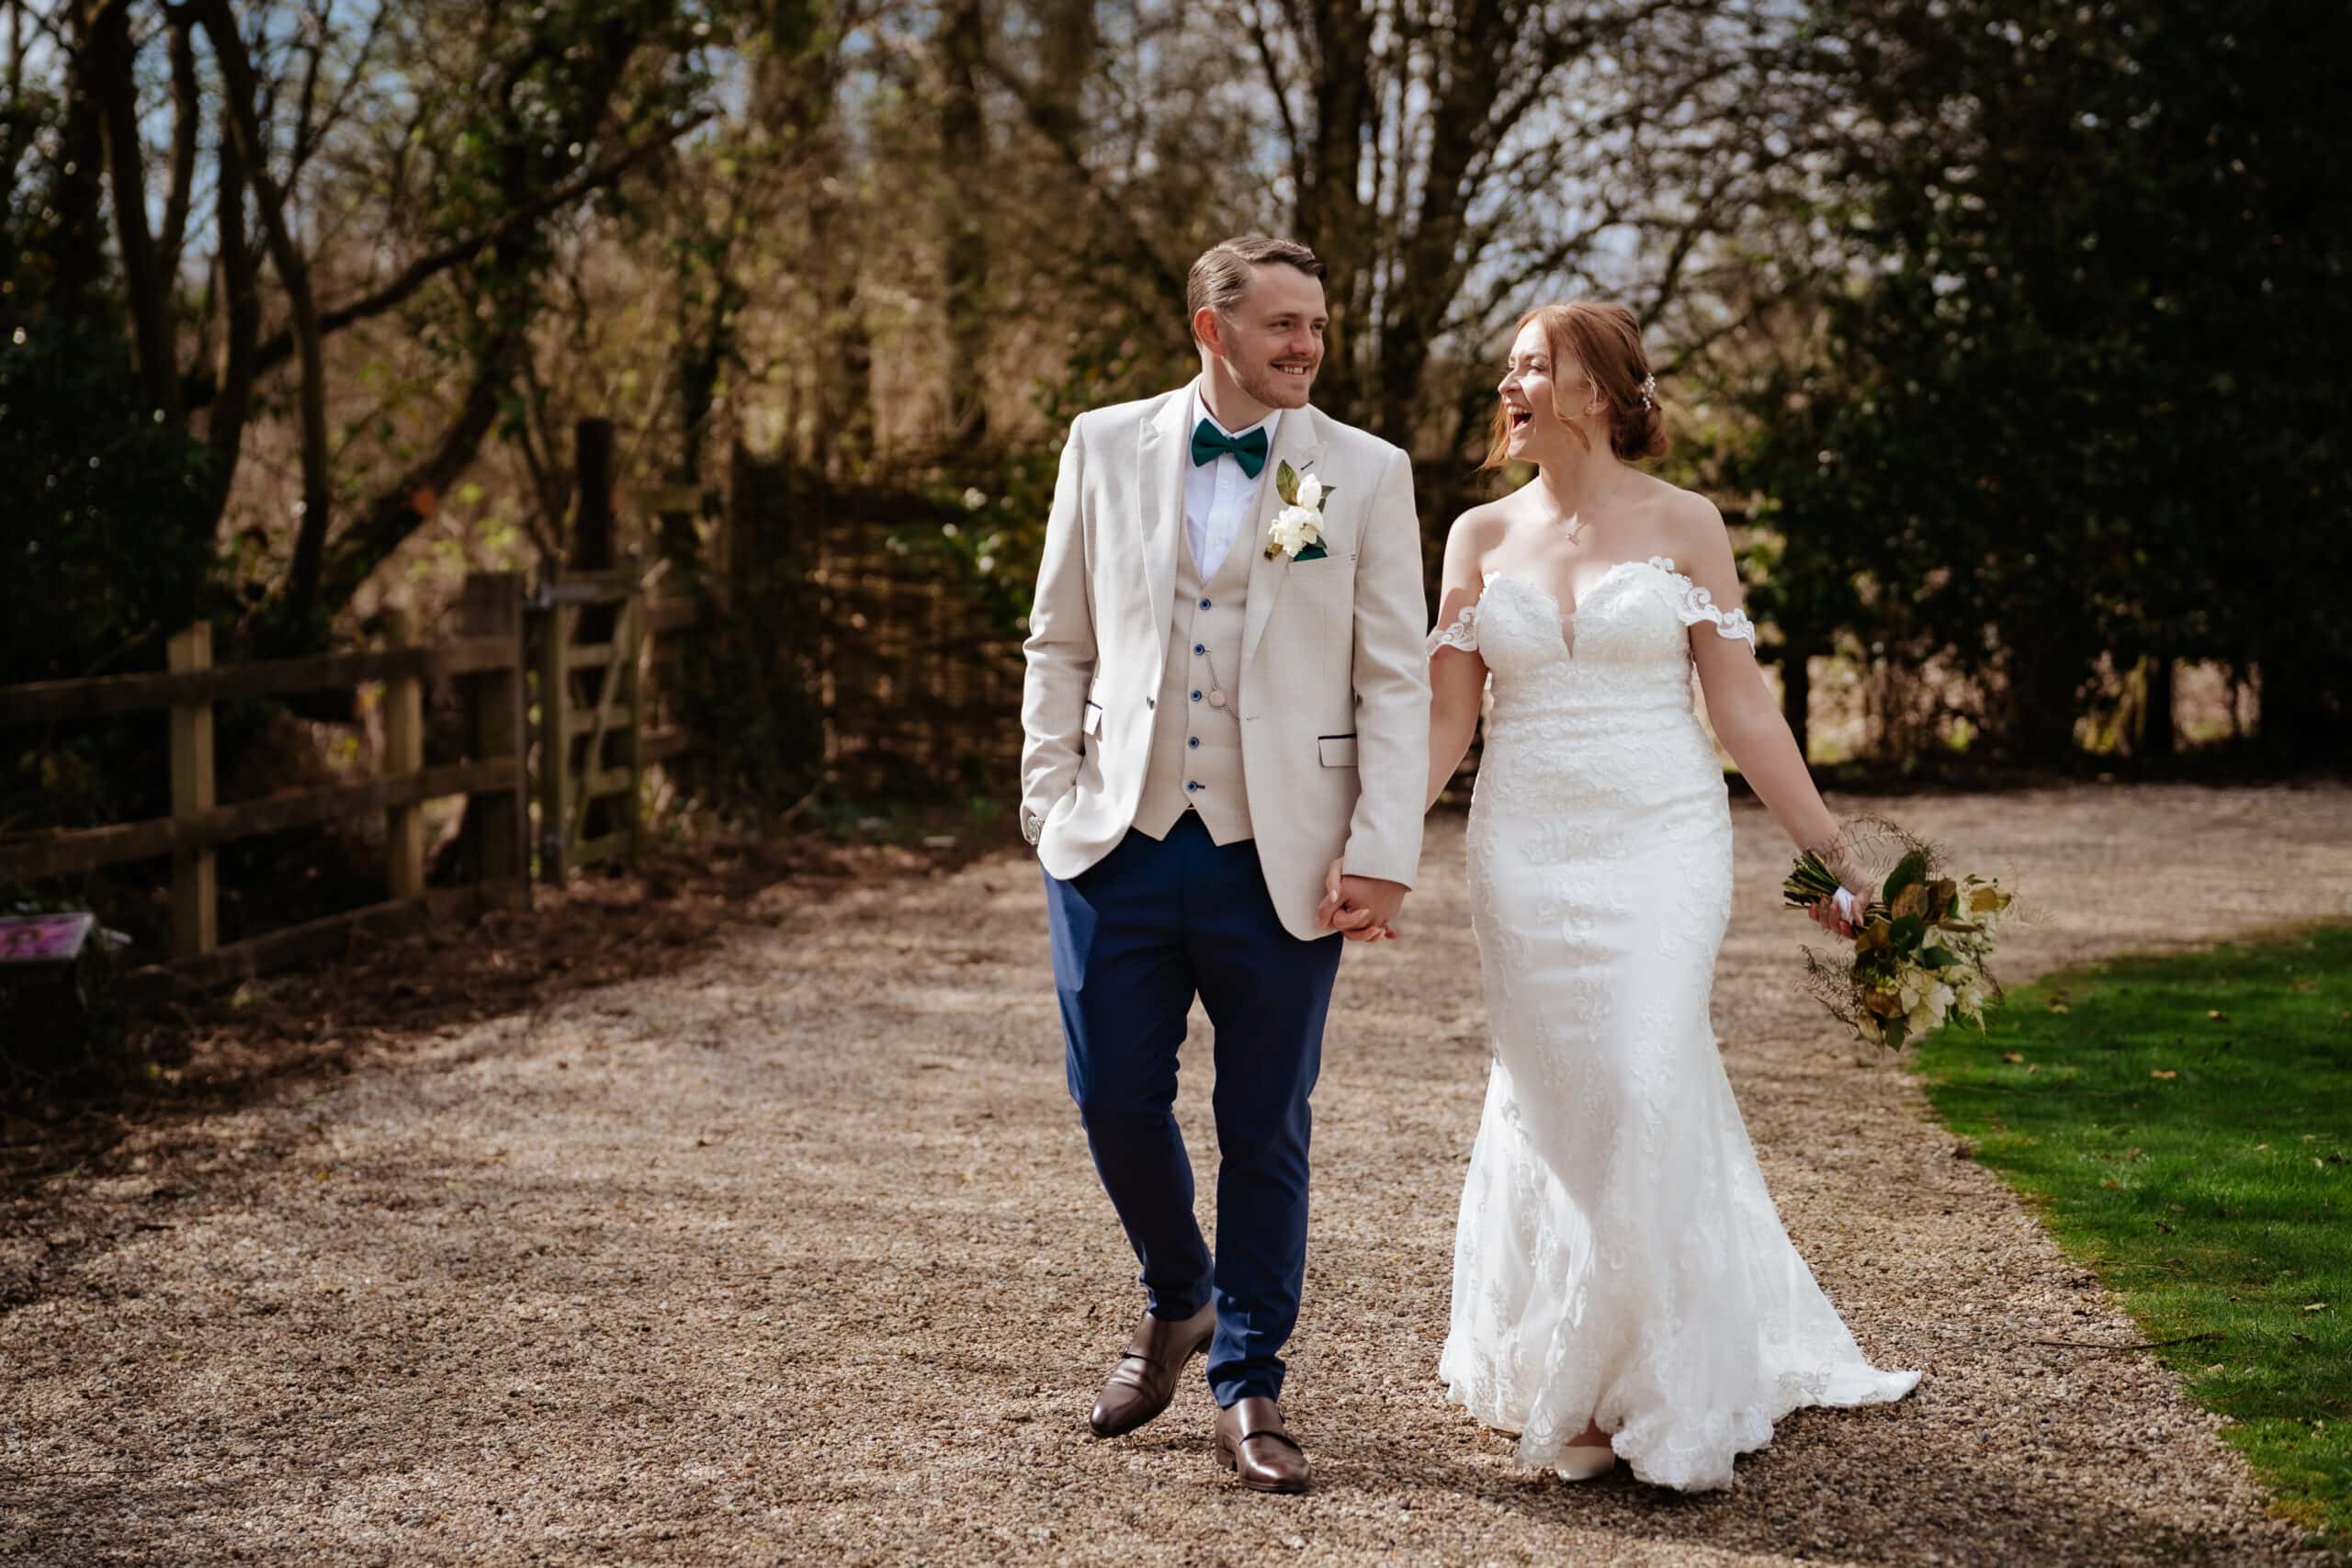 Married couple share an authentic wedding photography moment whilst walking & laughing at Tewin bury farm wedding venue in Hertfordshire